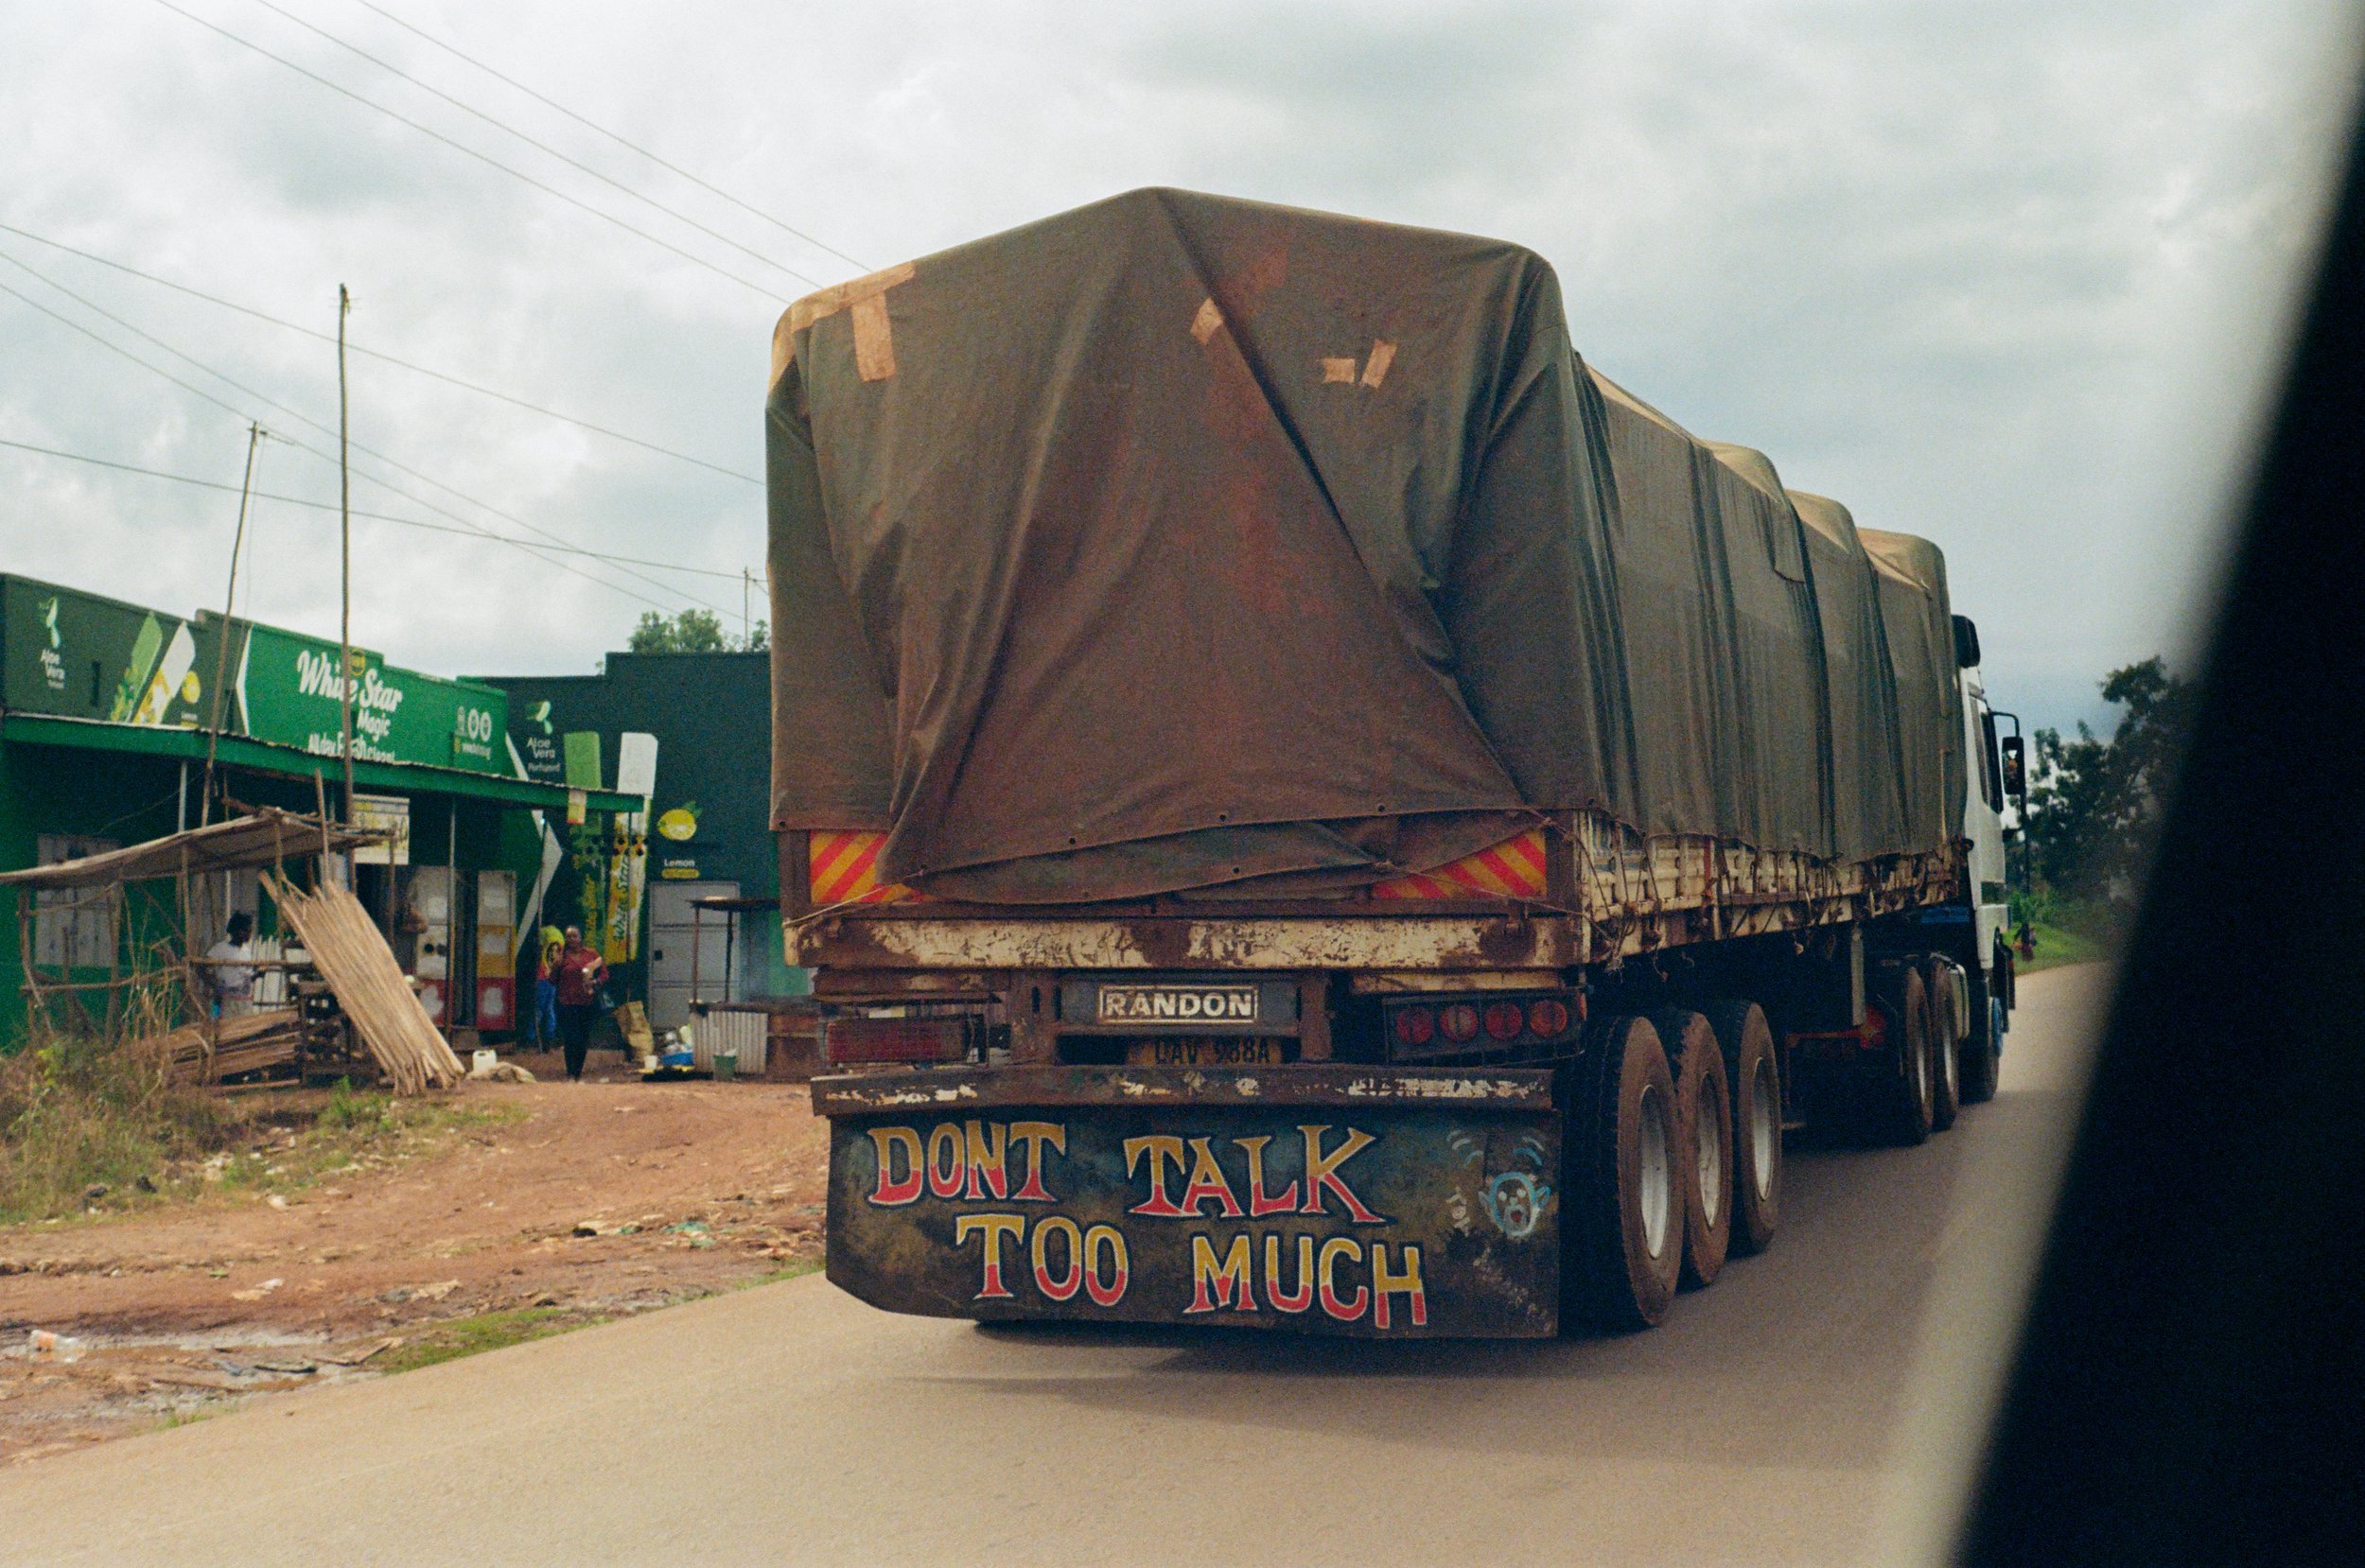 All trucks are labeled with a name. This one was particularly interesting. Fuji 200